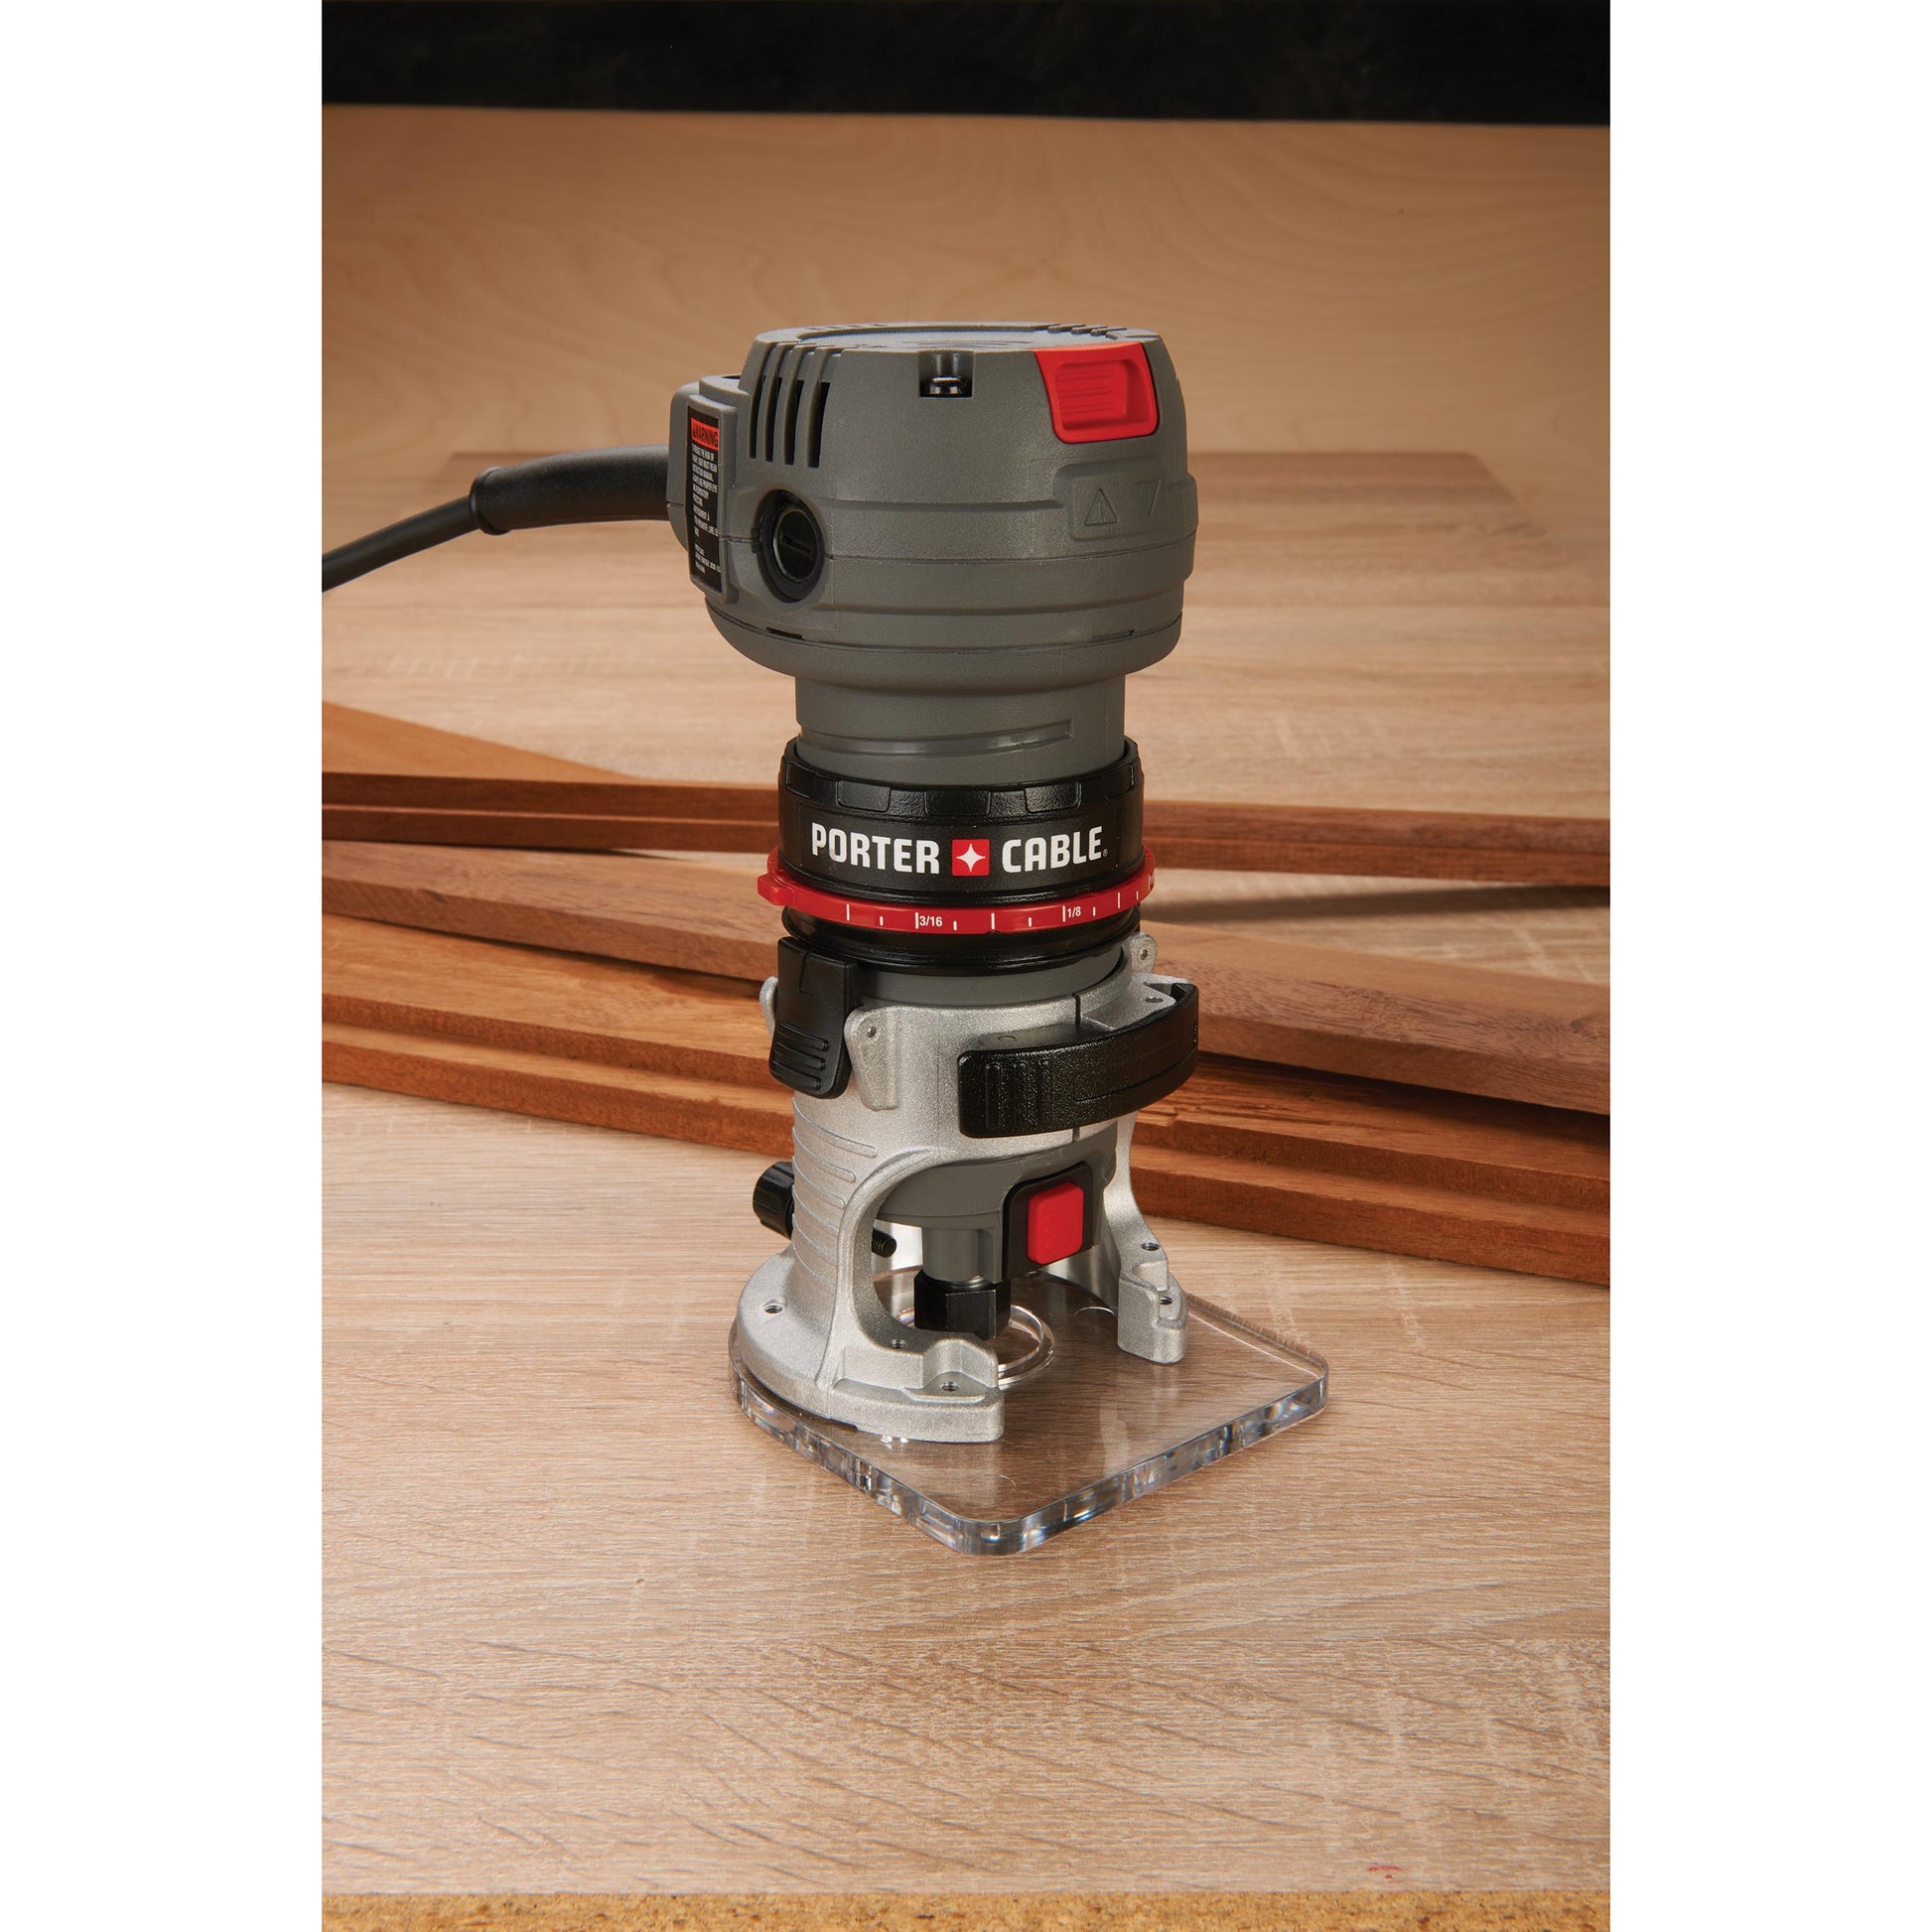 4.5A Laminate Trimmer / Router